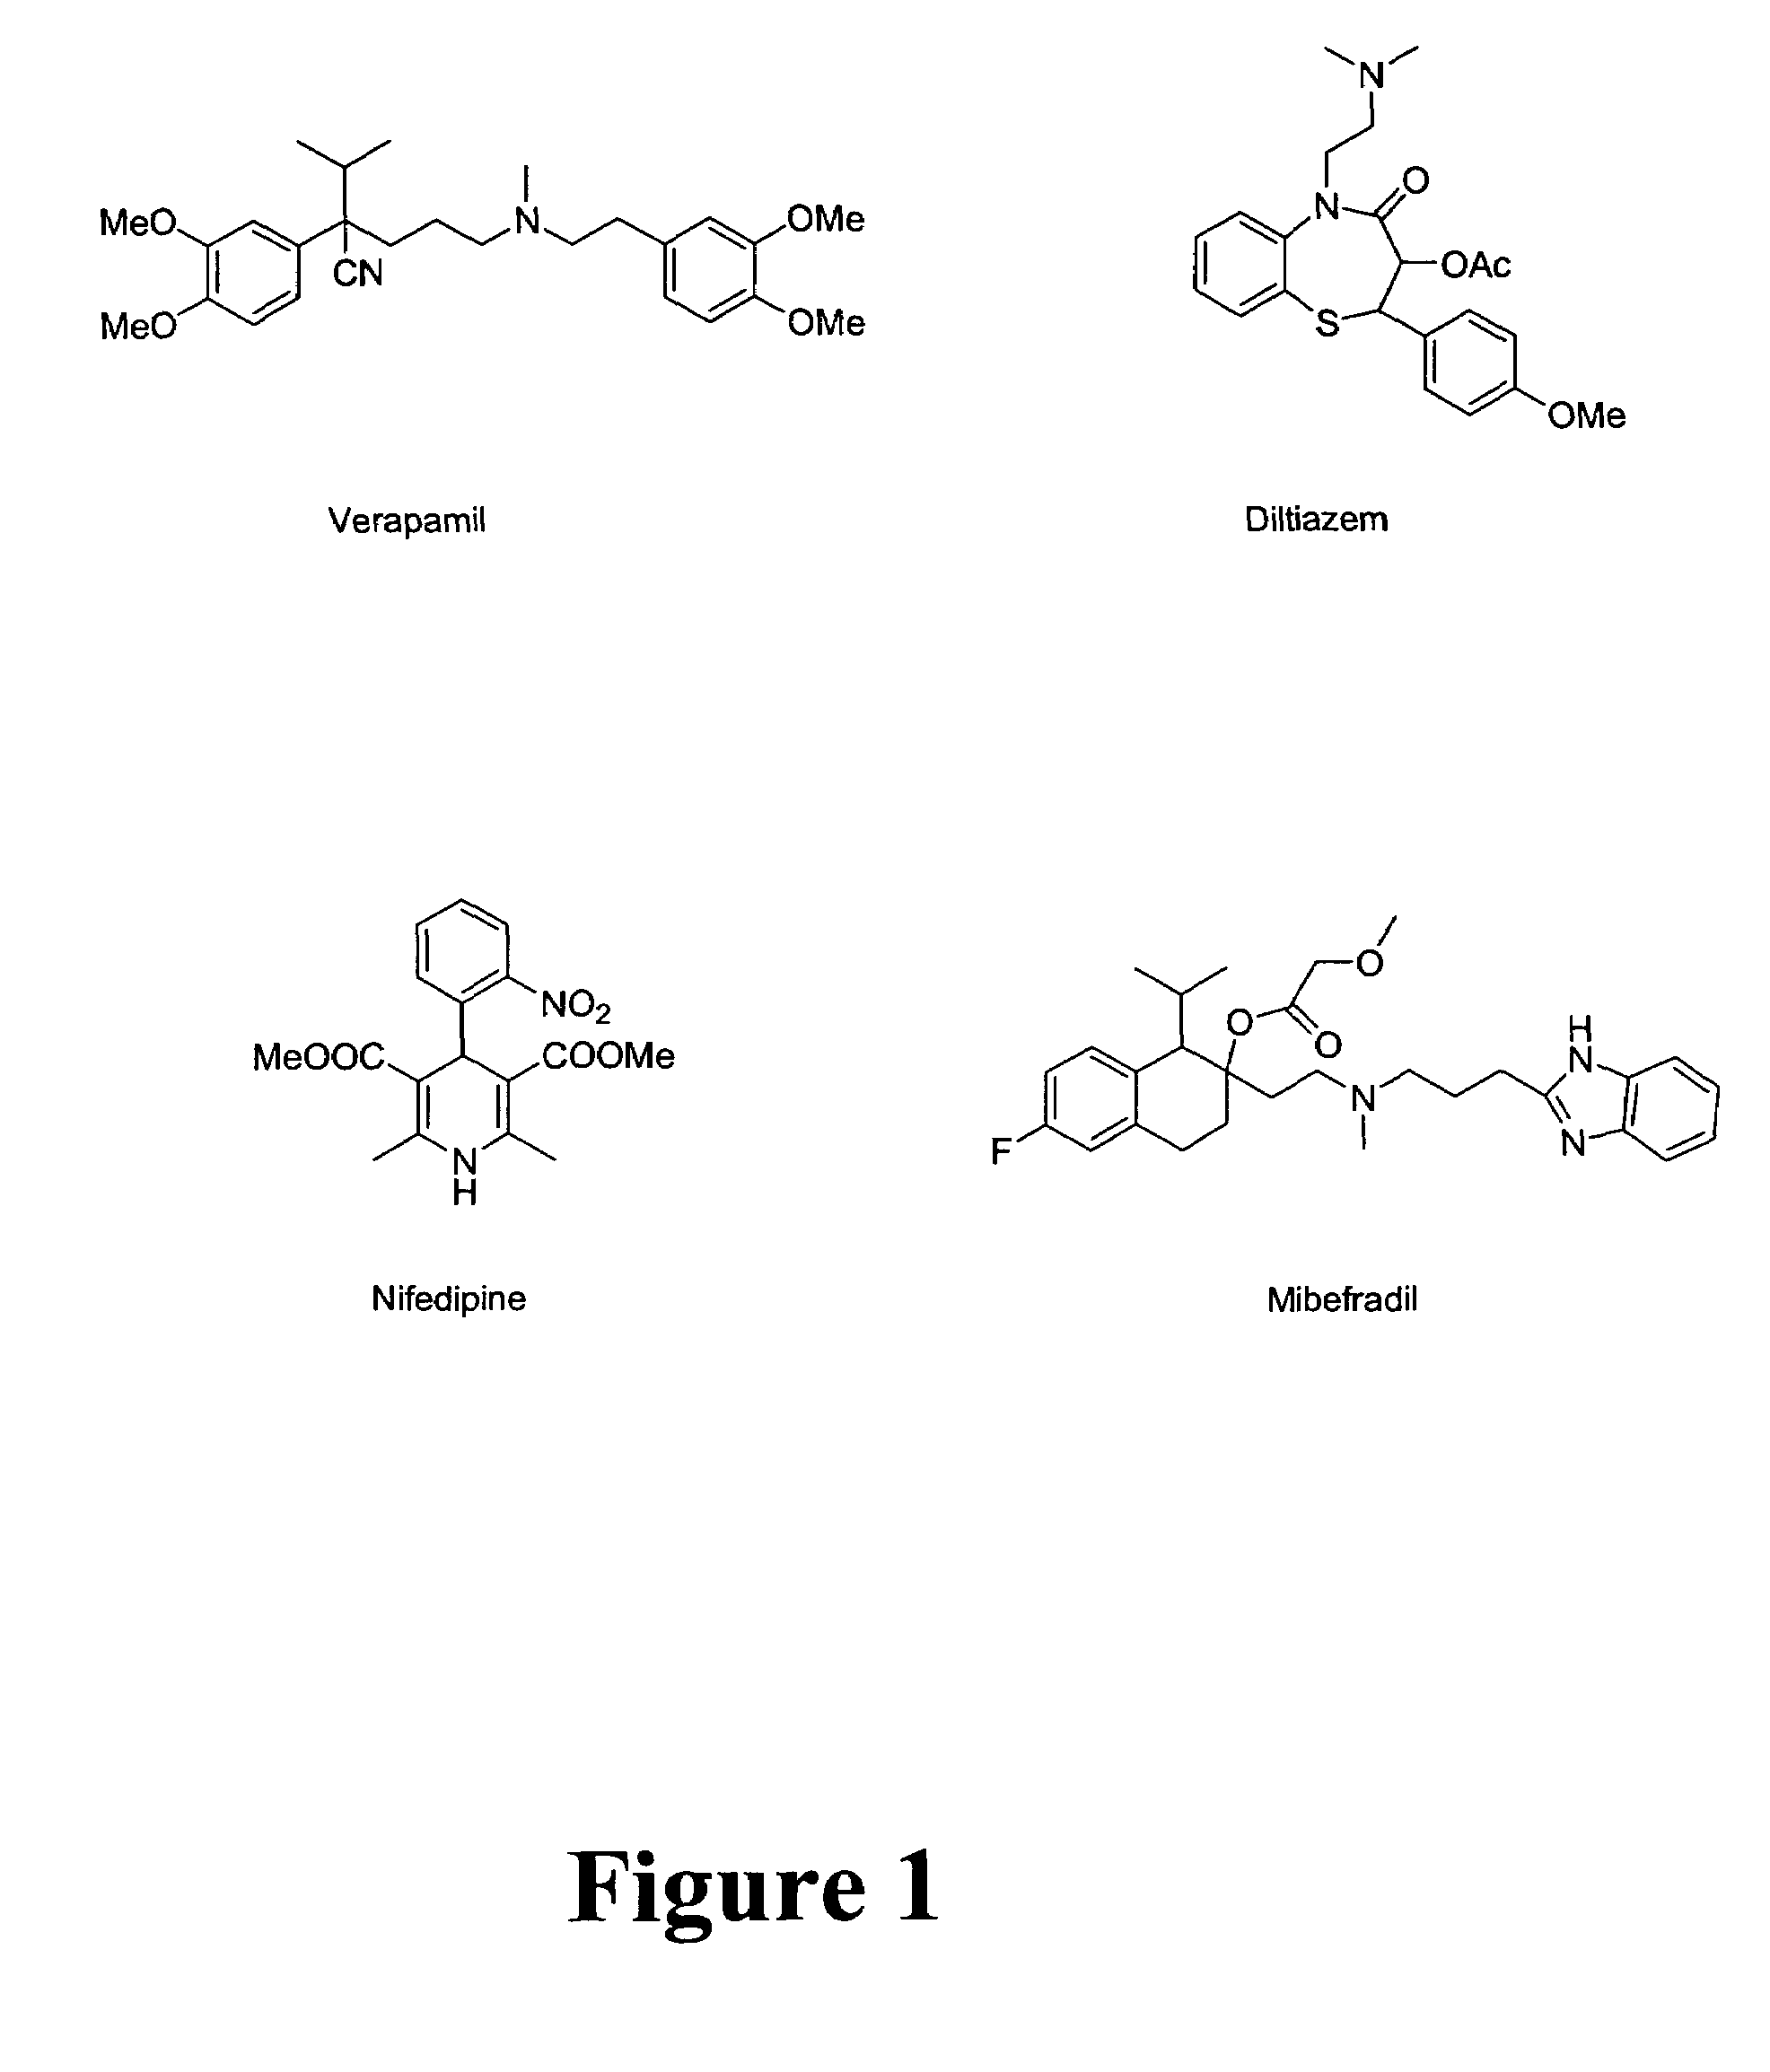 Materials and methods for the treatment of hypertension and angina